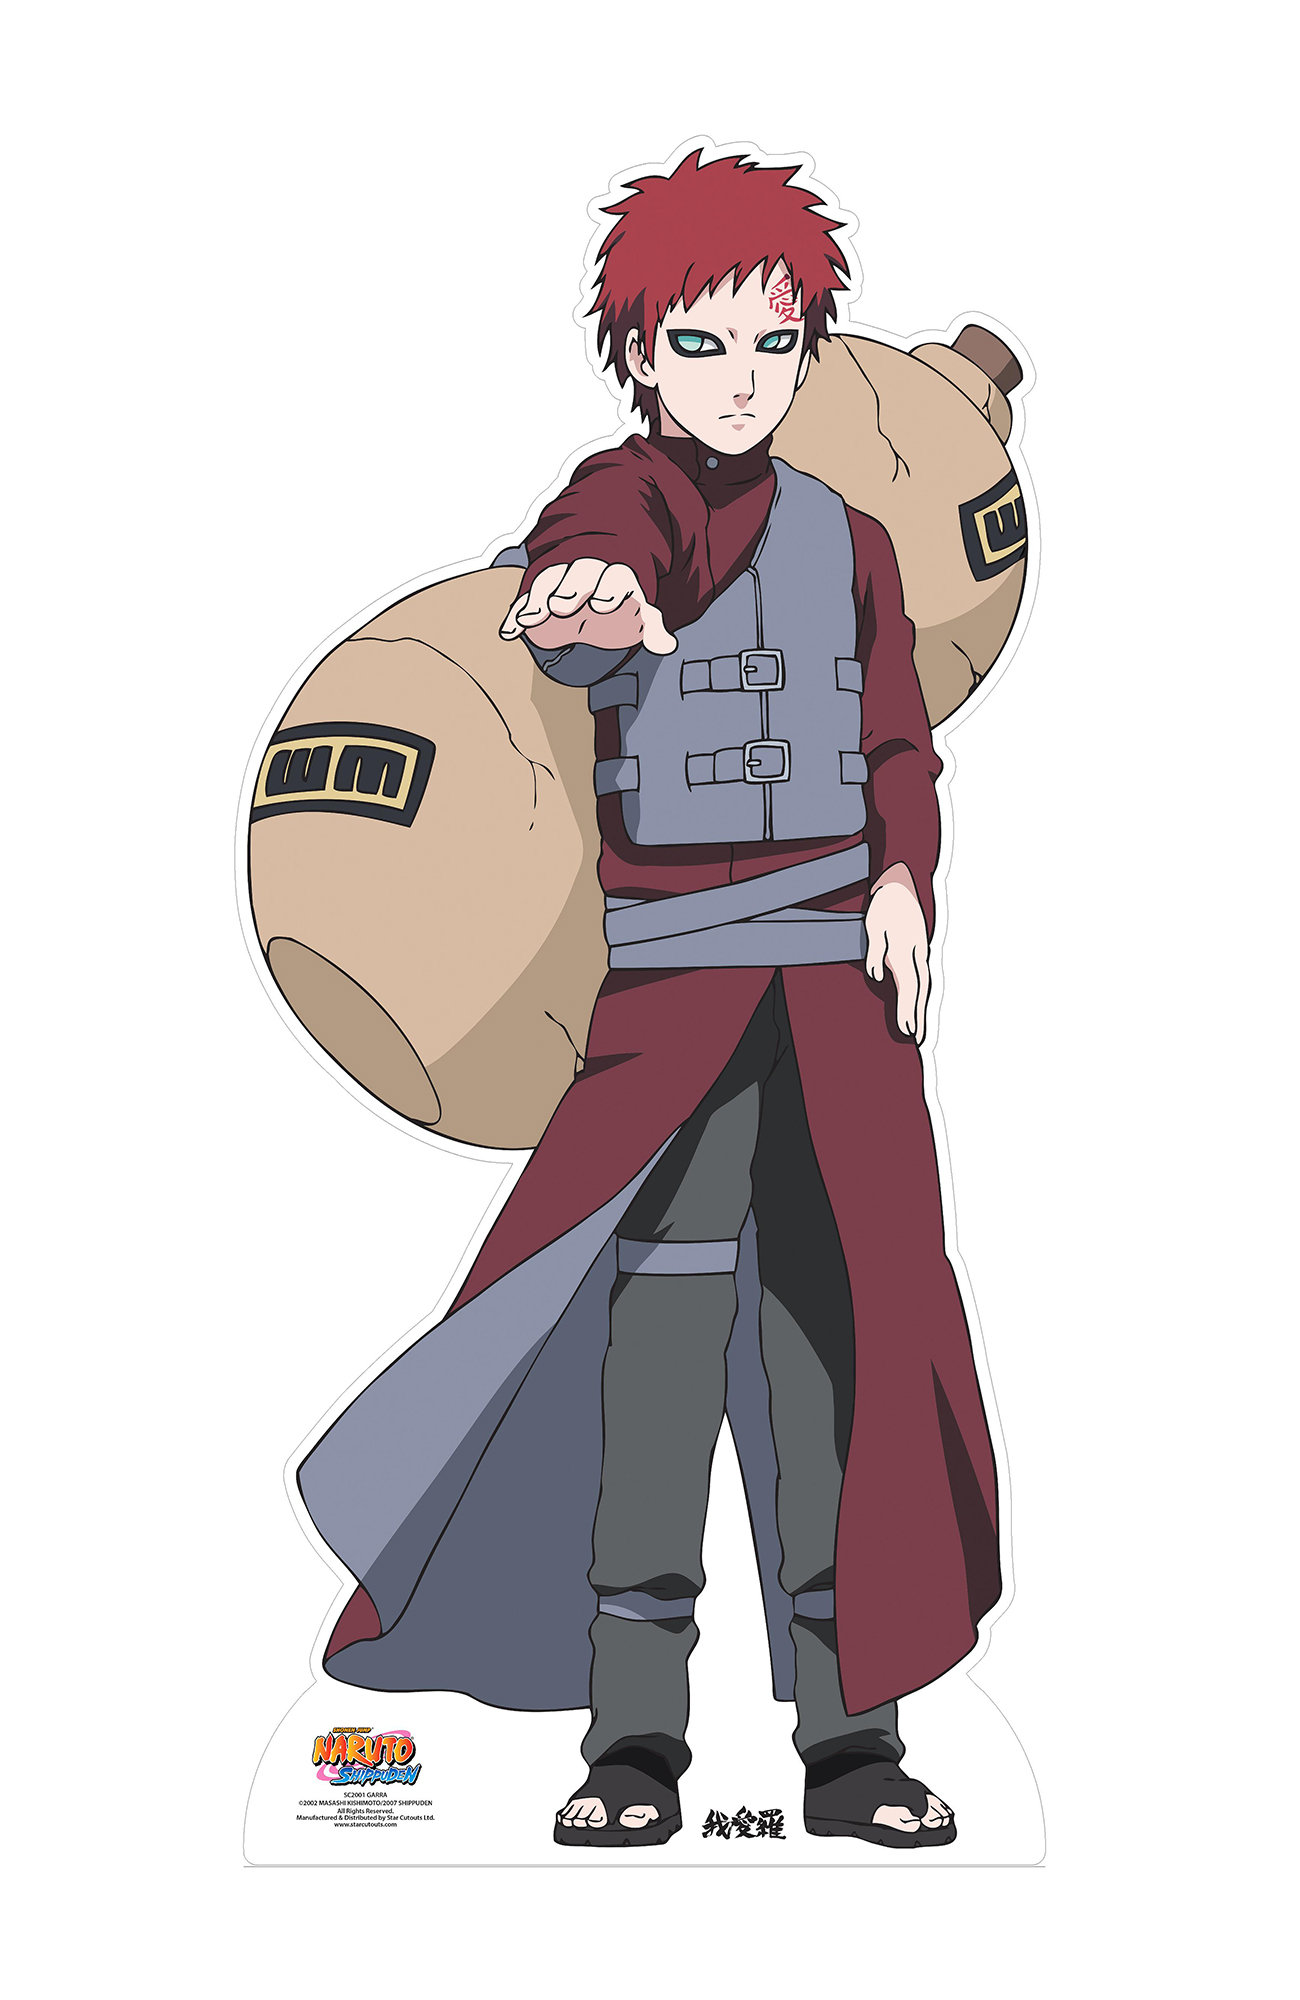 show me a picture of gaara